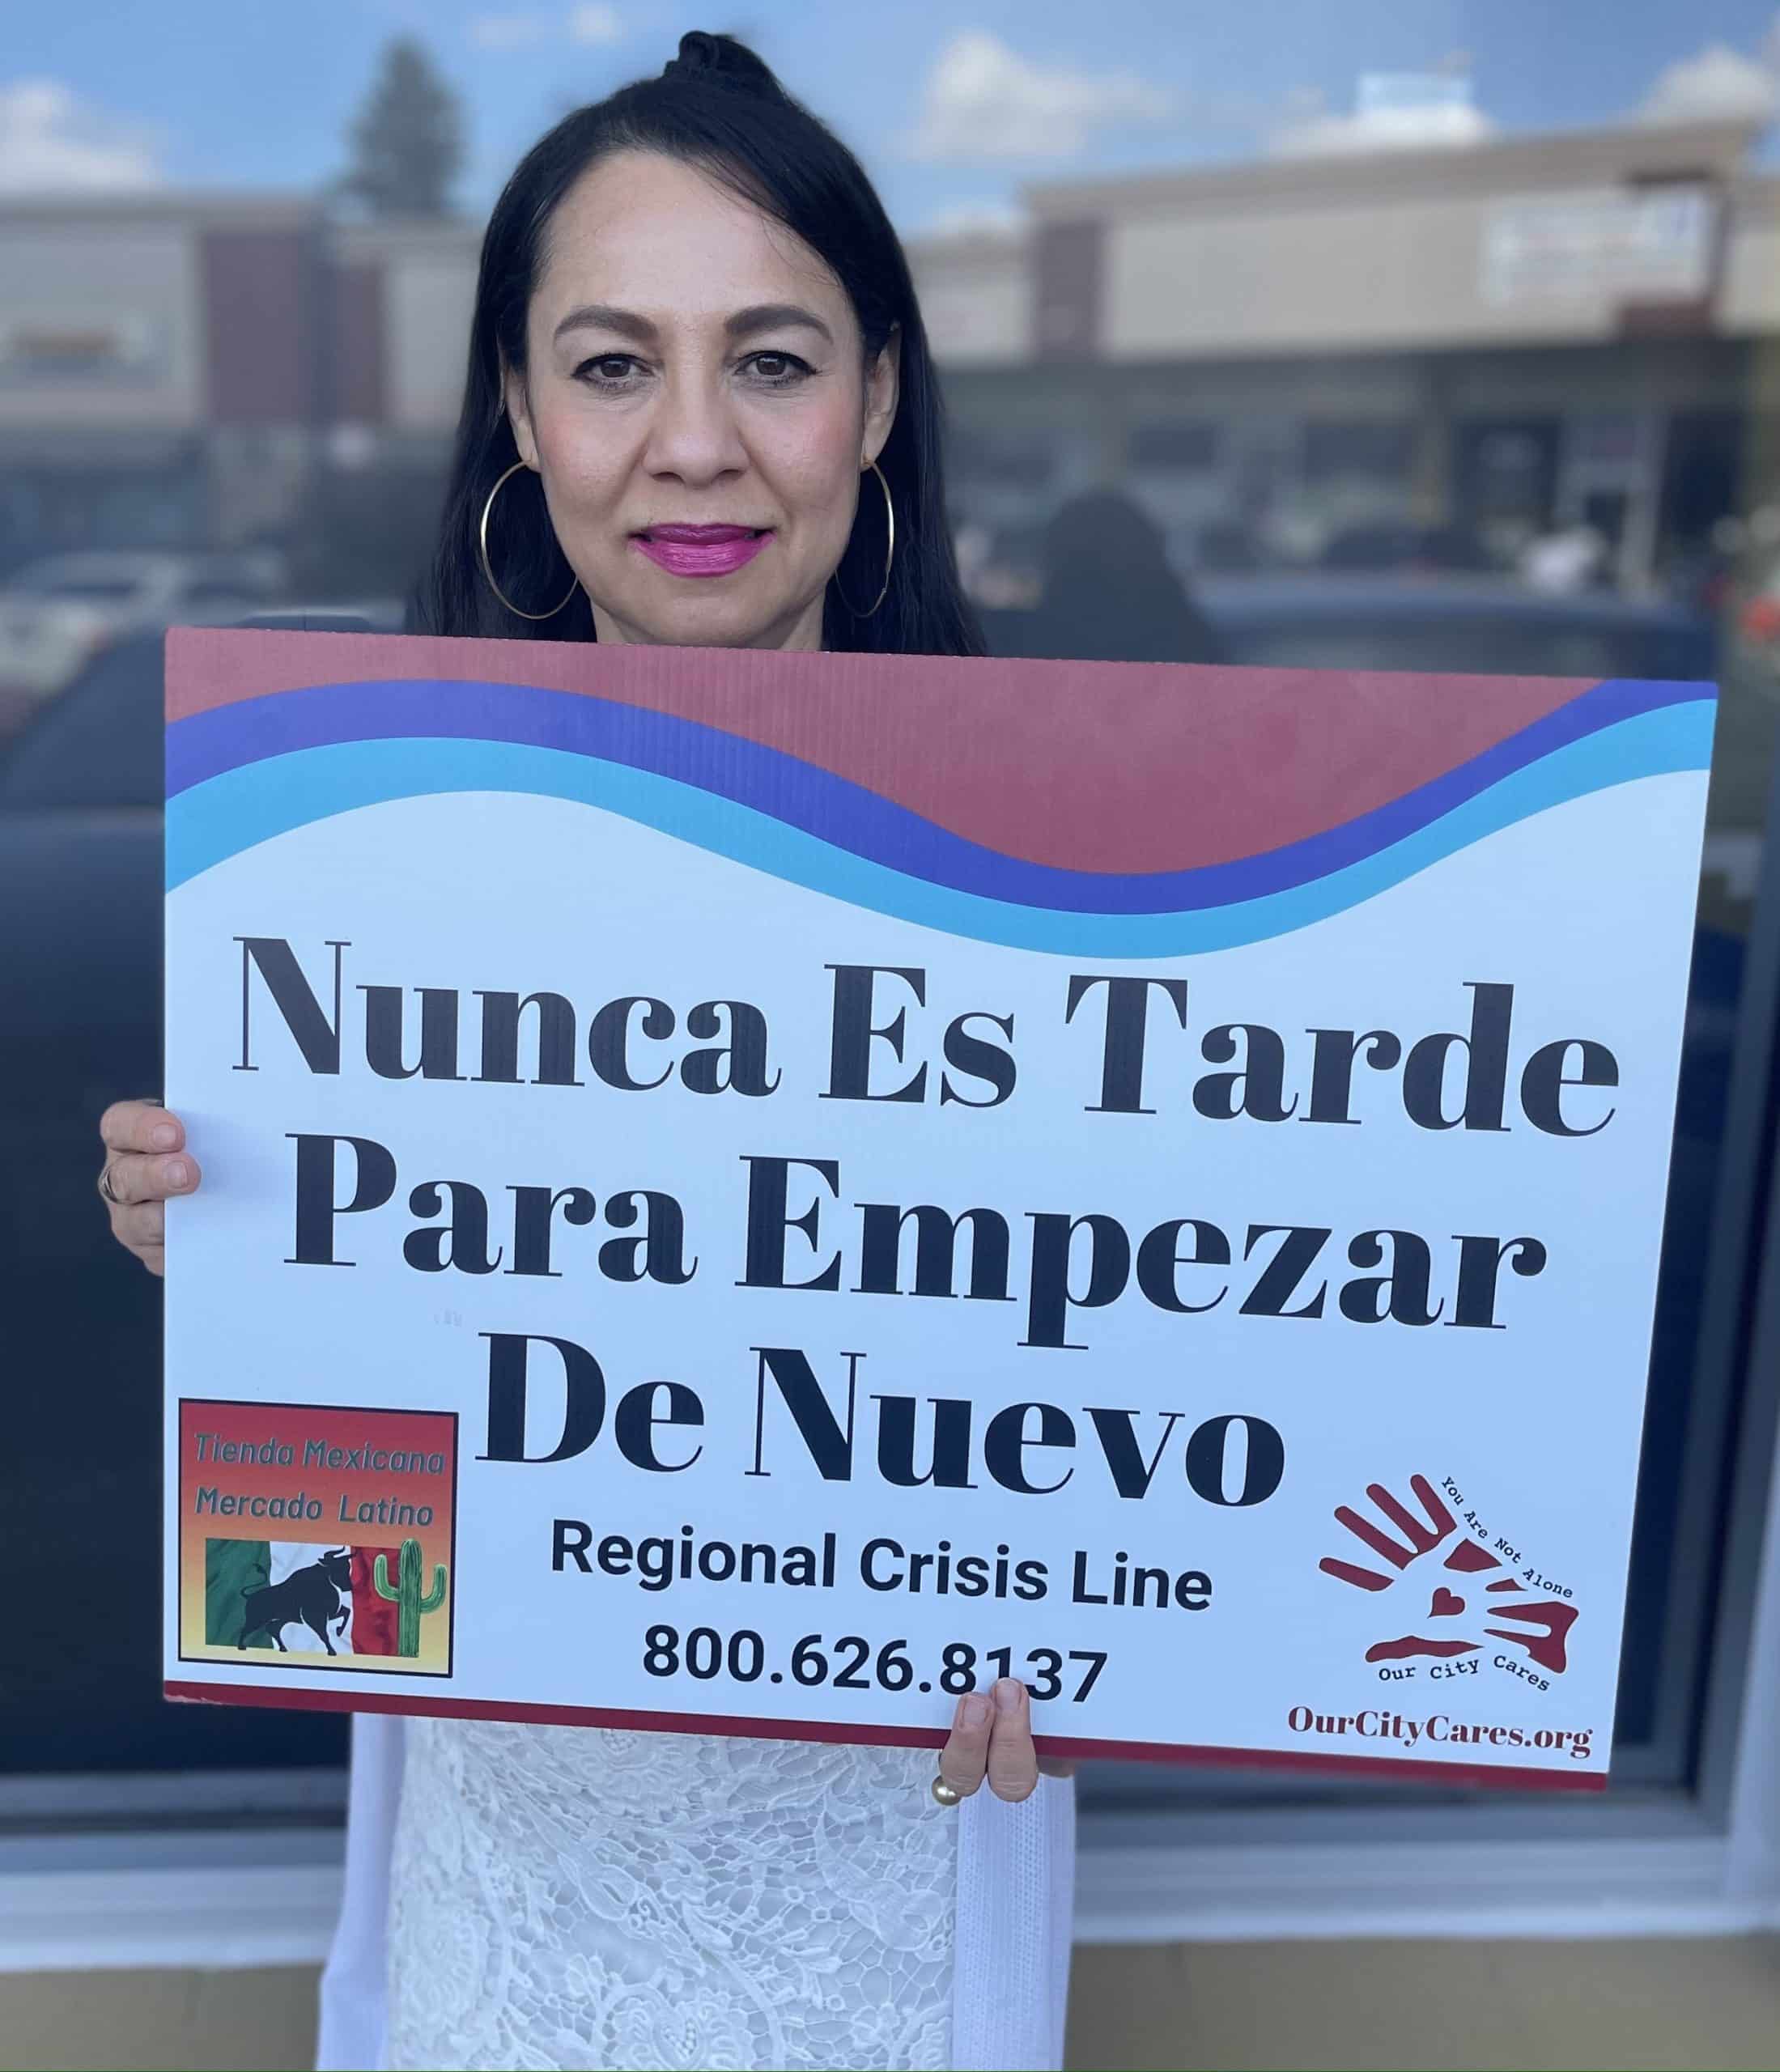 A woman with long black hair holds a sign that reads in Spanish, "Nunca Es Tarde Para Empezar De Nuevo" and in English, "Regional Crisis Line 800.626.8137